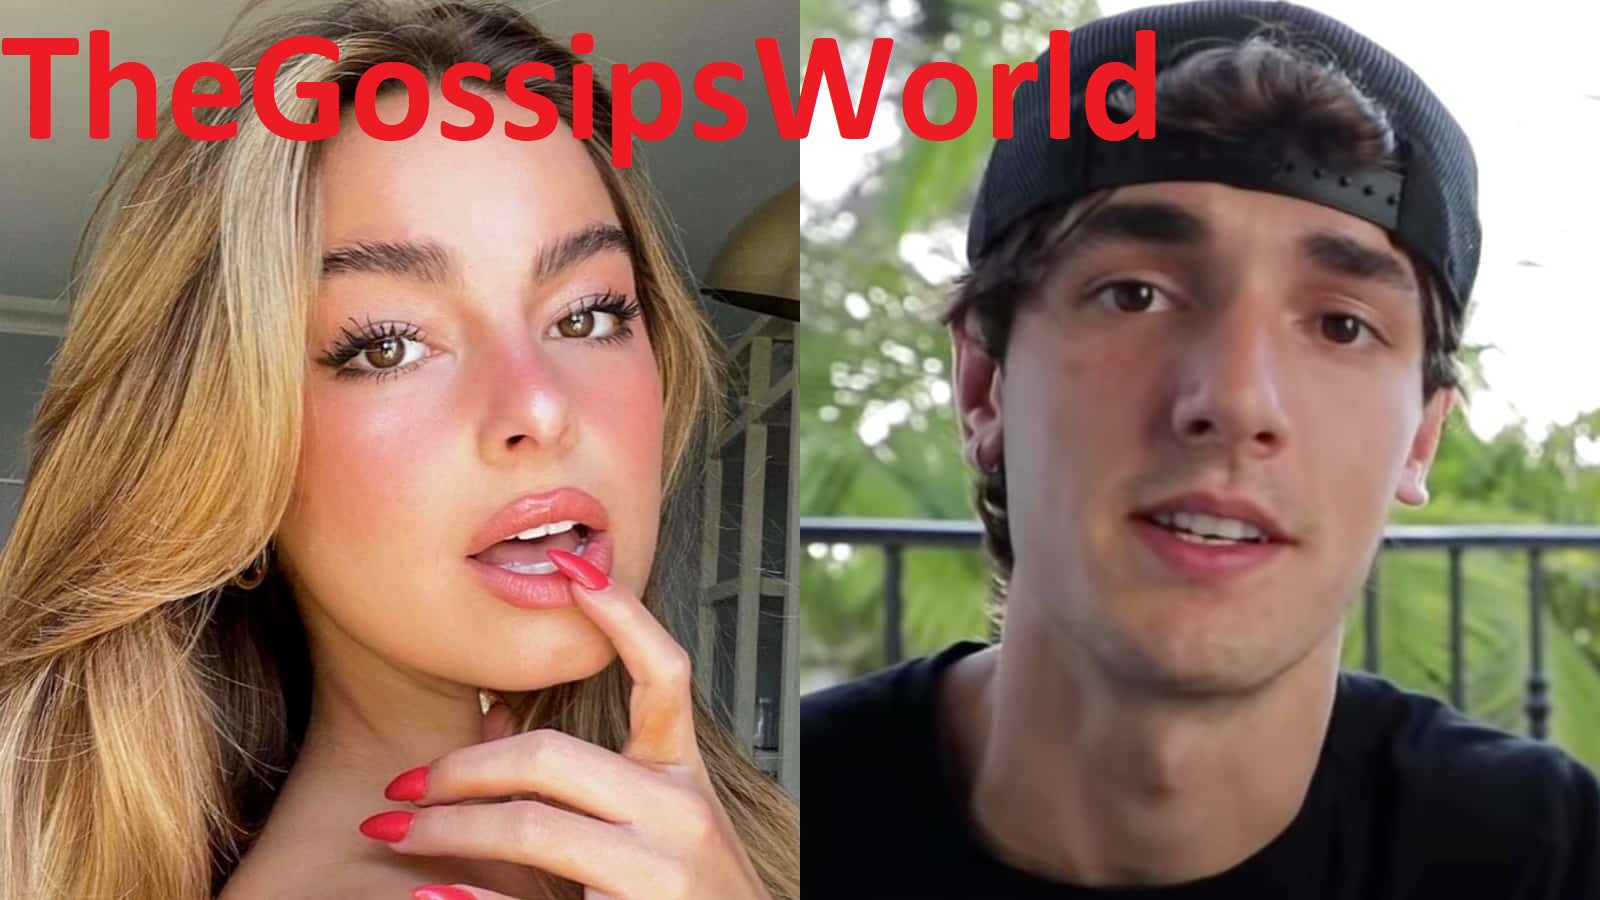 Who Is ADDISON RAE Video Leaked, Idkijustworkh11 Video Viral On Twitter & Reddit, Full Video Link Explained!